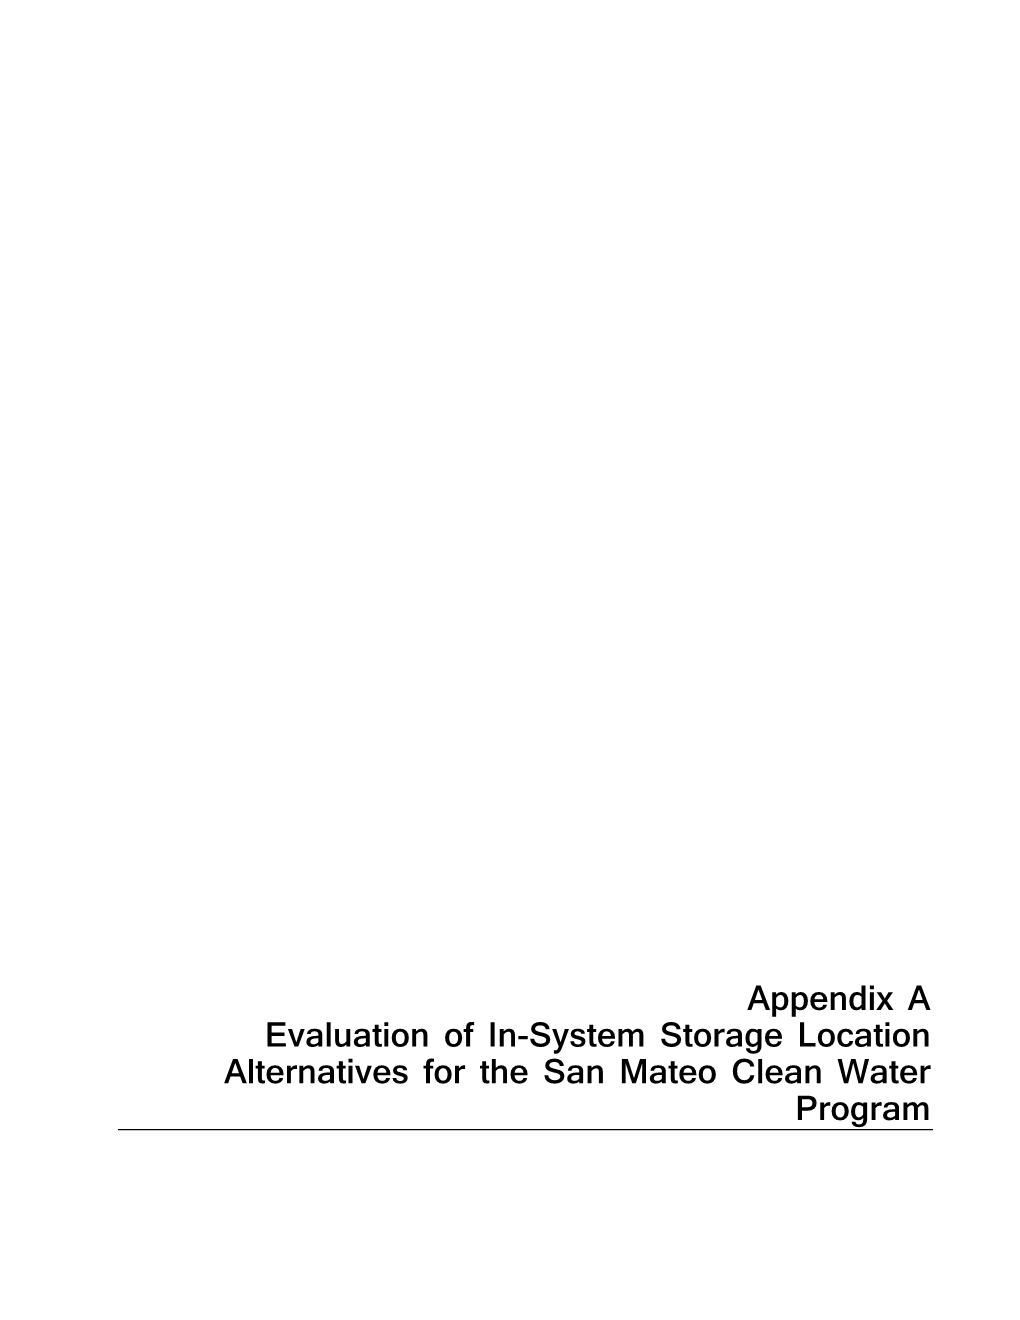 Appendix a Evaluation of In-System Storage Location Alternatives for the San Mateo Clean Water Program